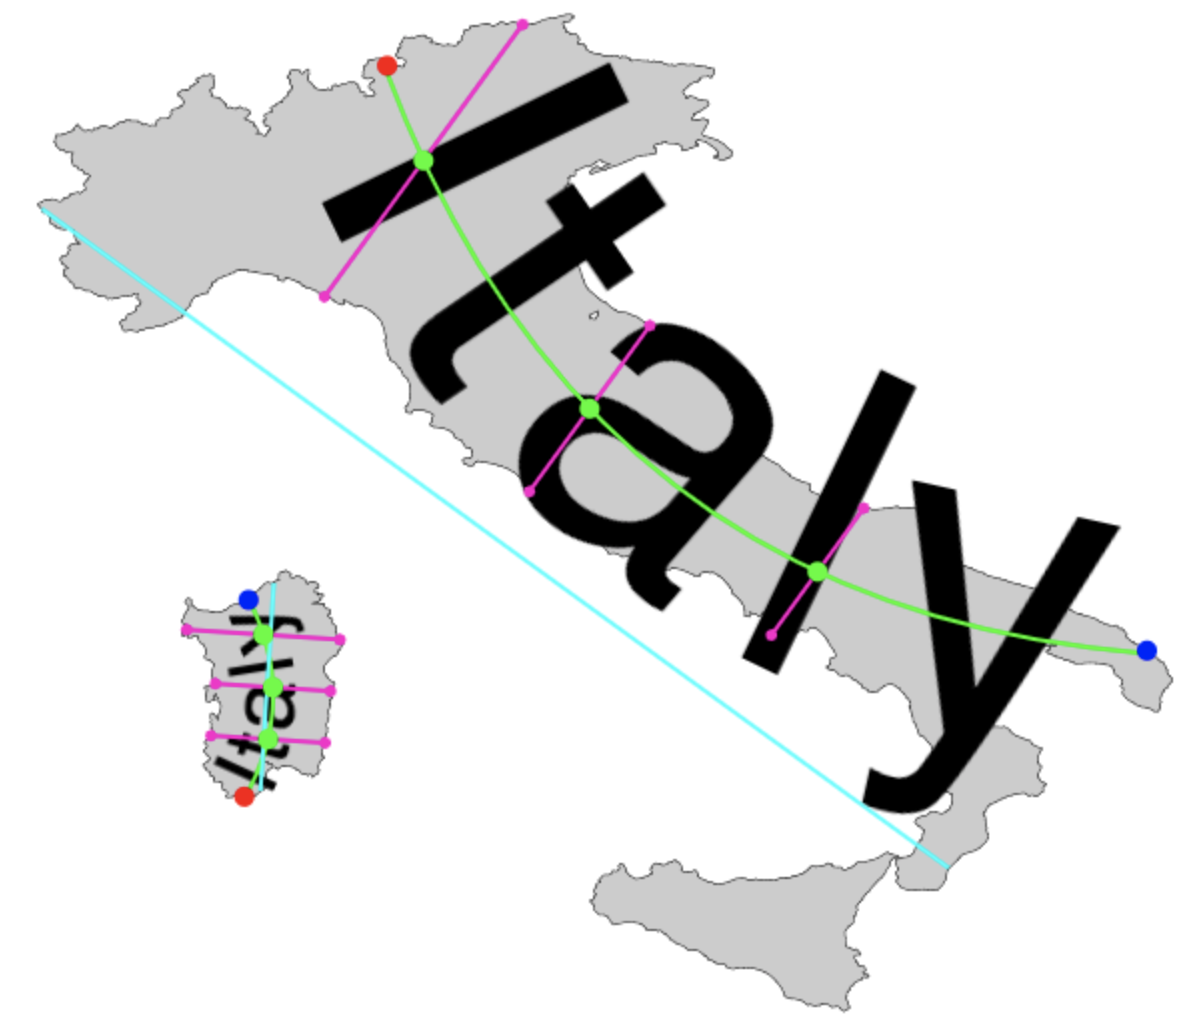 Italy labelled using region-labels algorithm, with debug lines